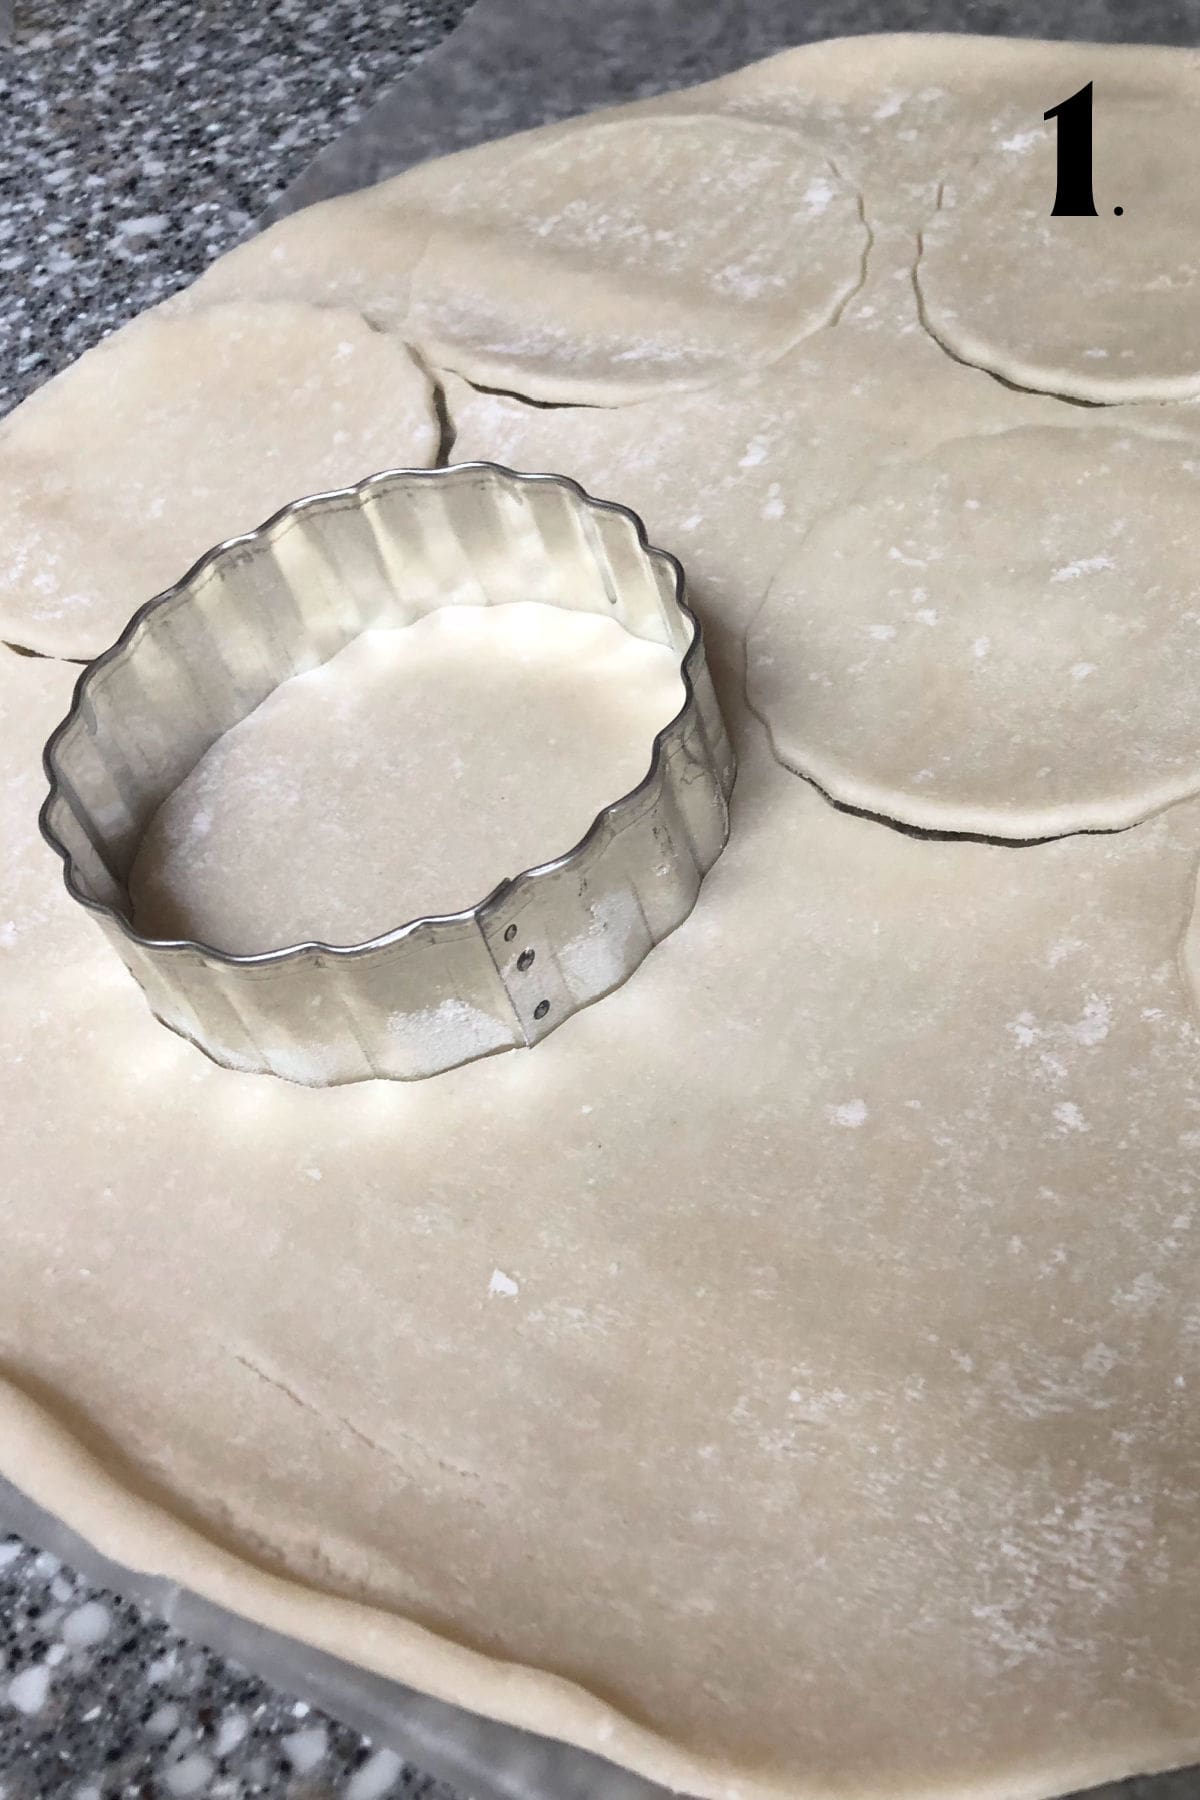 How to Make Blueberry Hand Pies Step 1 - cut pie crust in circles.